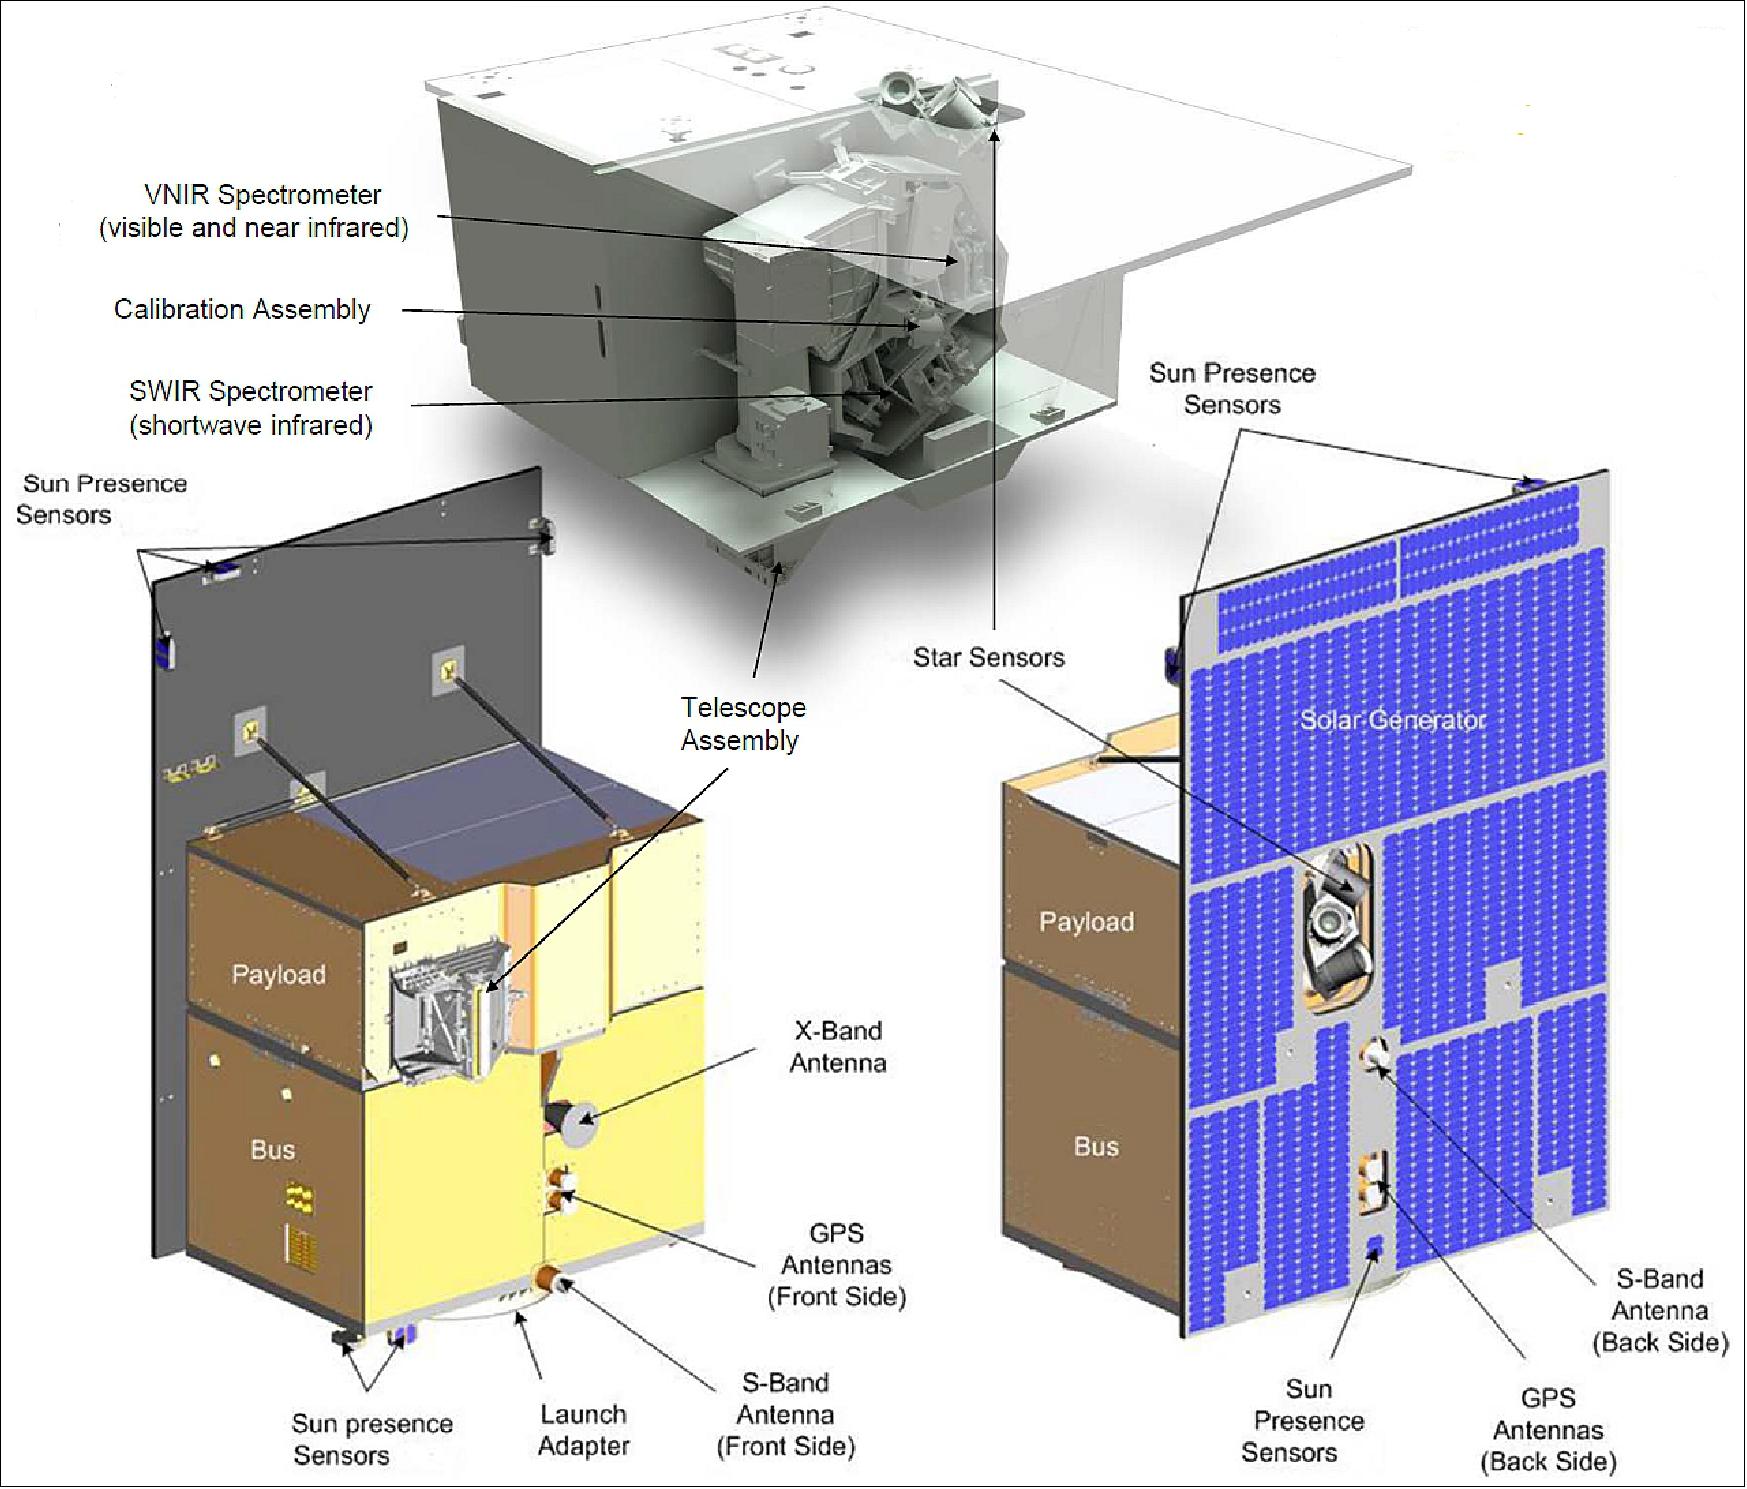 Figure 9: Illustration of the EnMAP spacecraft and of the Hyperspectral Imager (top), image credit: OHB